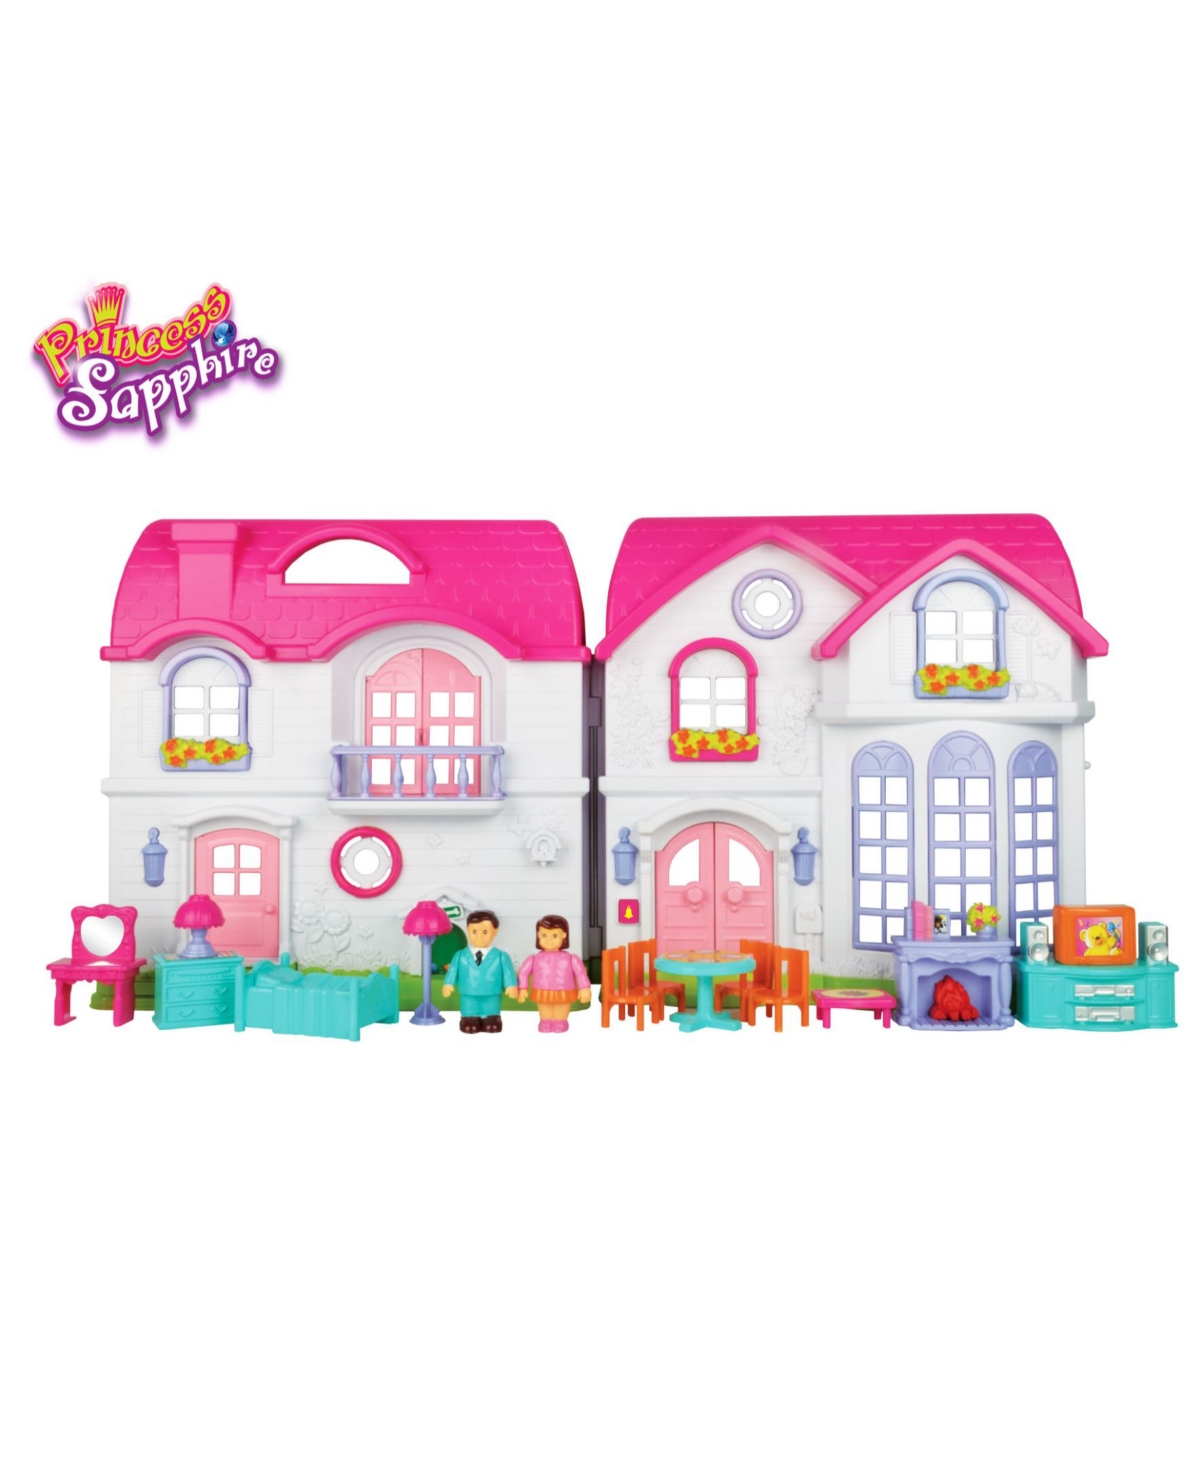 Redbox Princess Sapphire Deluxe Doll House, 17 Piece In Multi